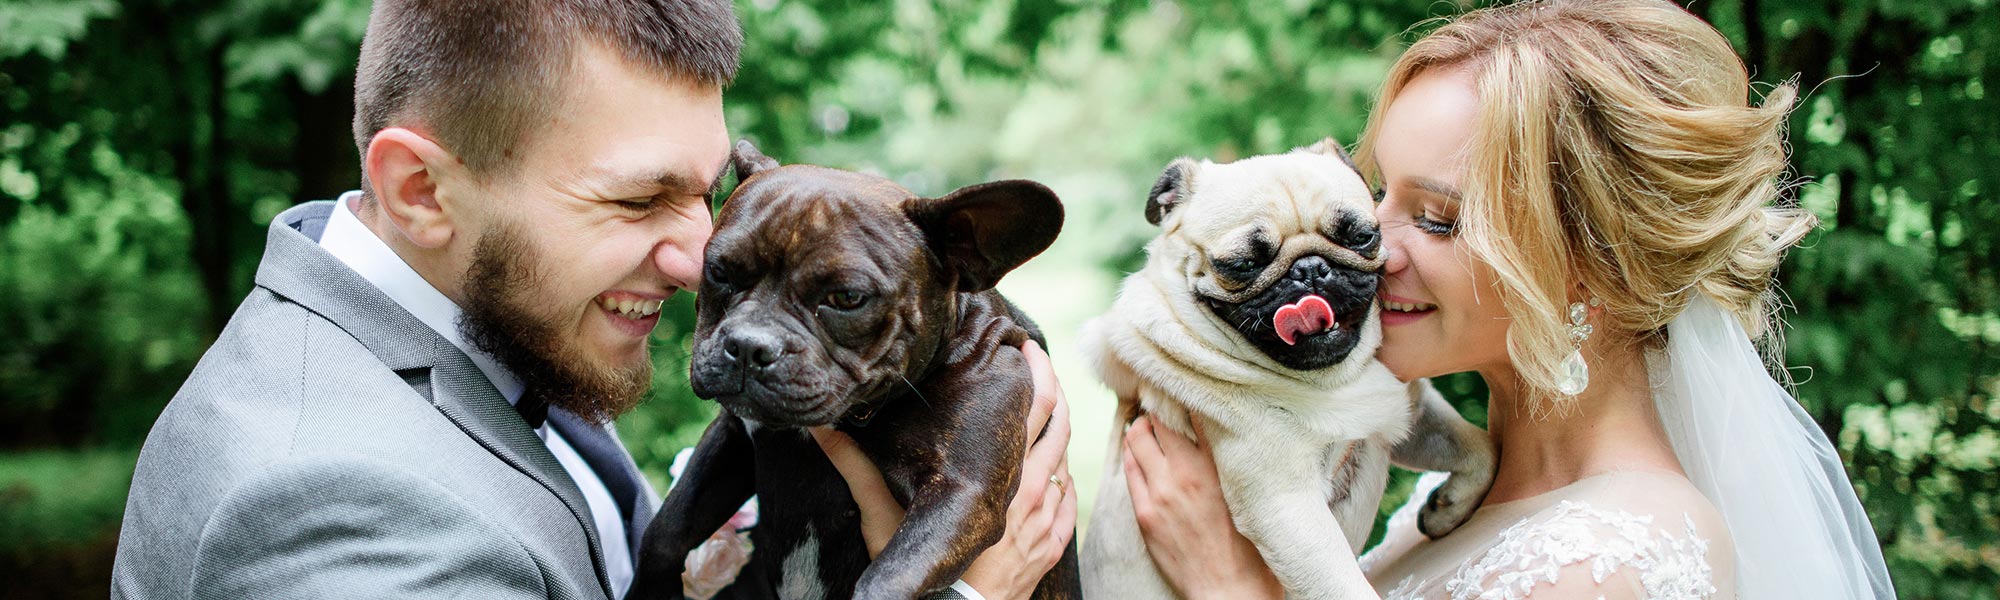 5 Ways to Involve Your pet in Your Wedding